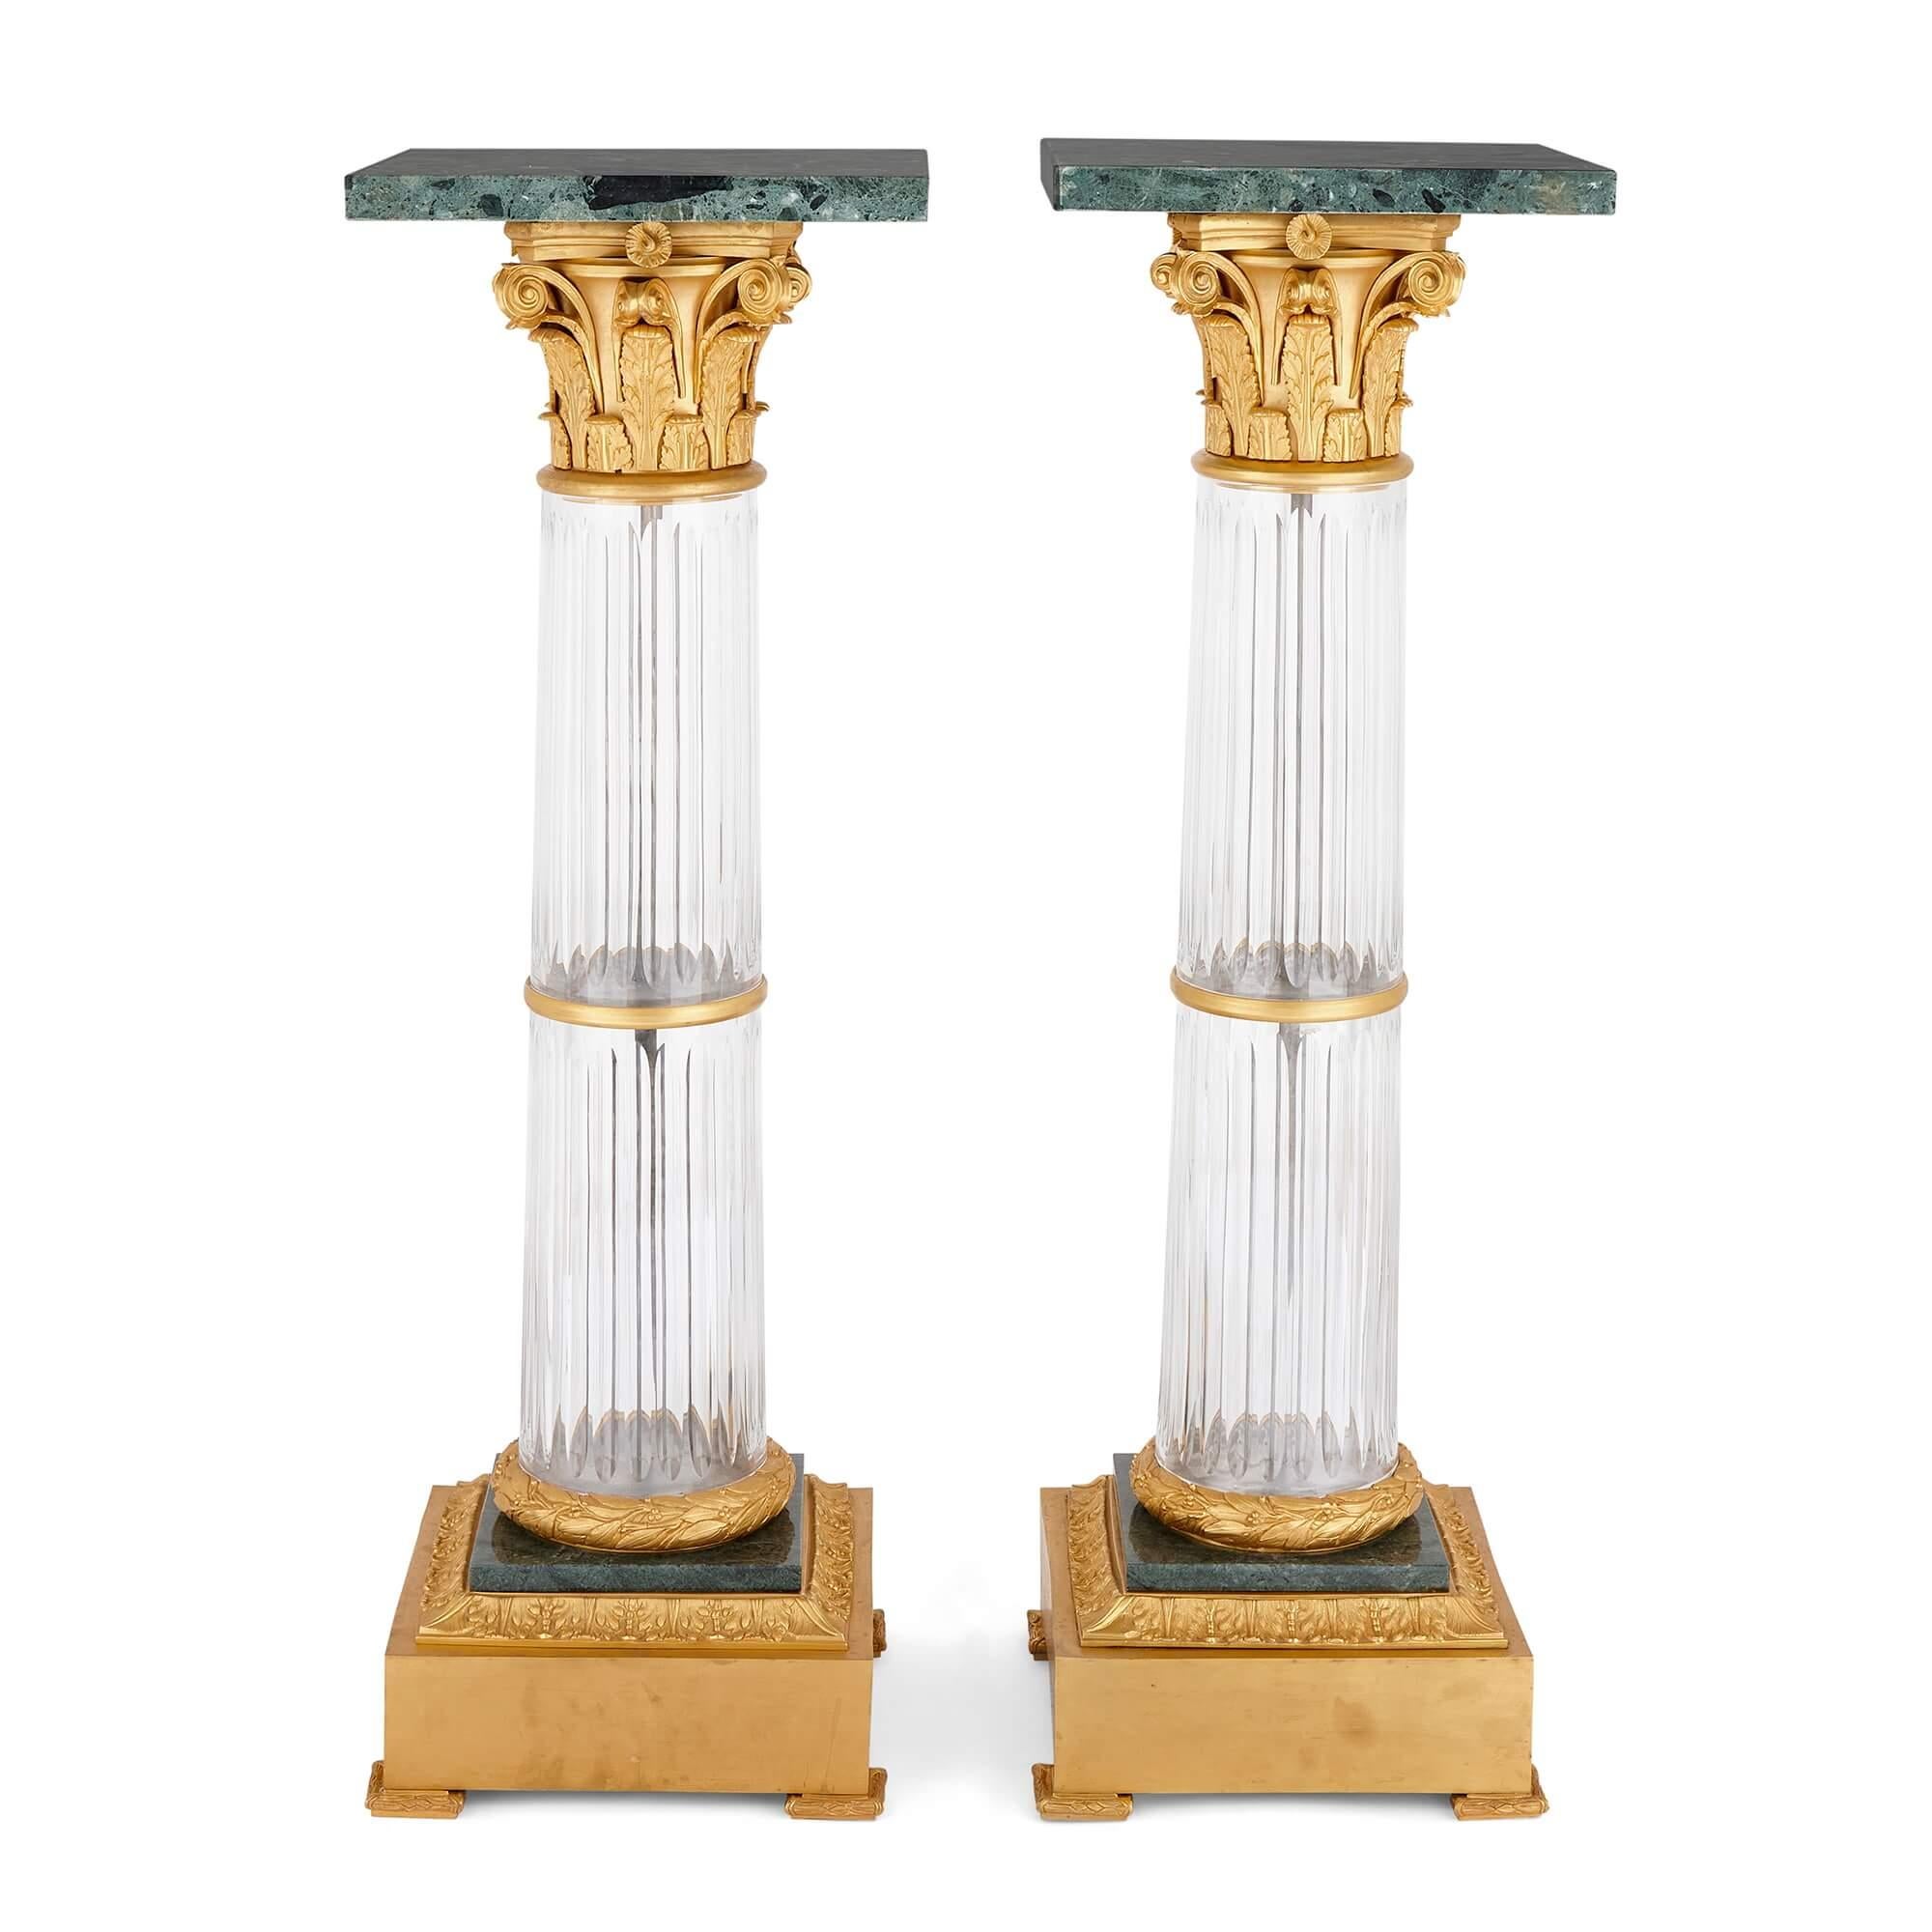 Pair of large French Neoclassical ormolu, glass and marble pedestals
French, 20th century
Height 112.5cm, width 36cm, depth 36cm

These exceptional pieces are a pair of large French pedestals, in the form of Corinthian columns, crafted from